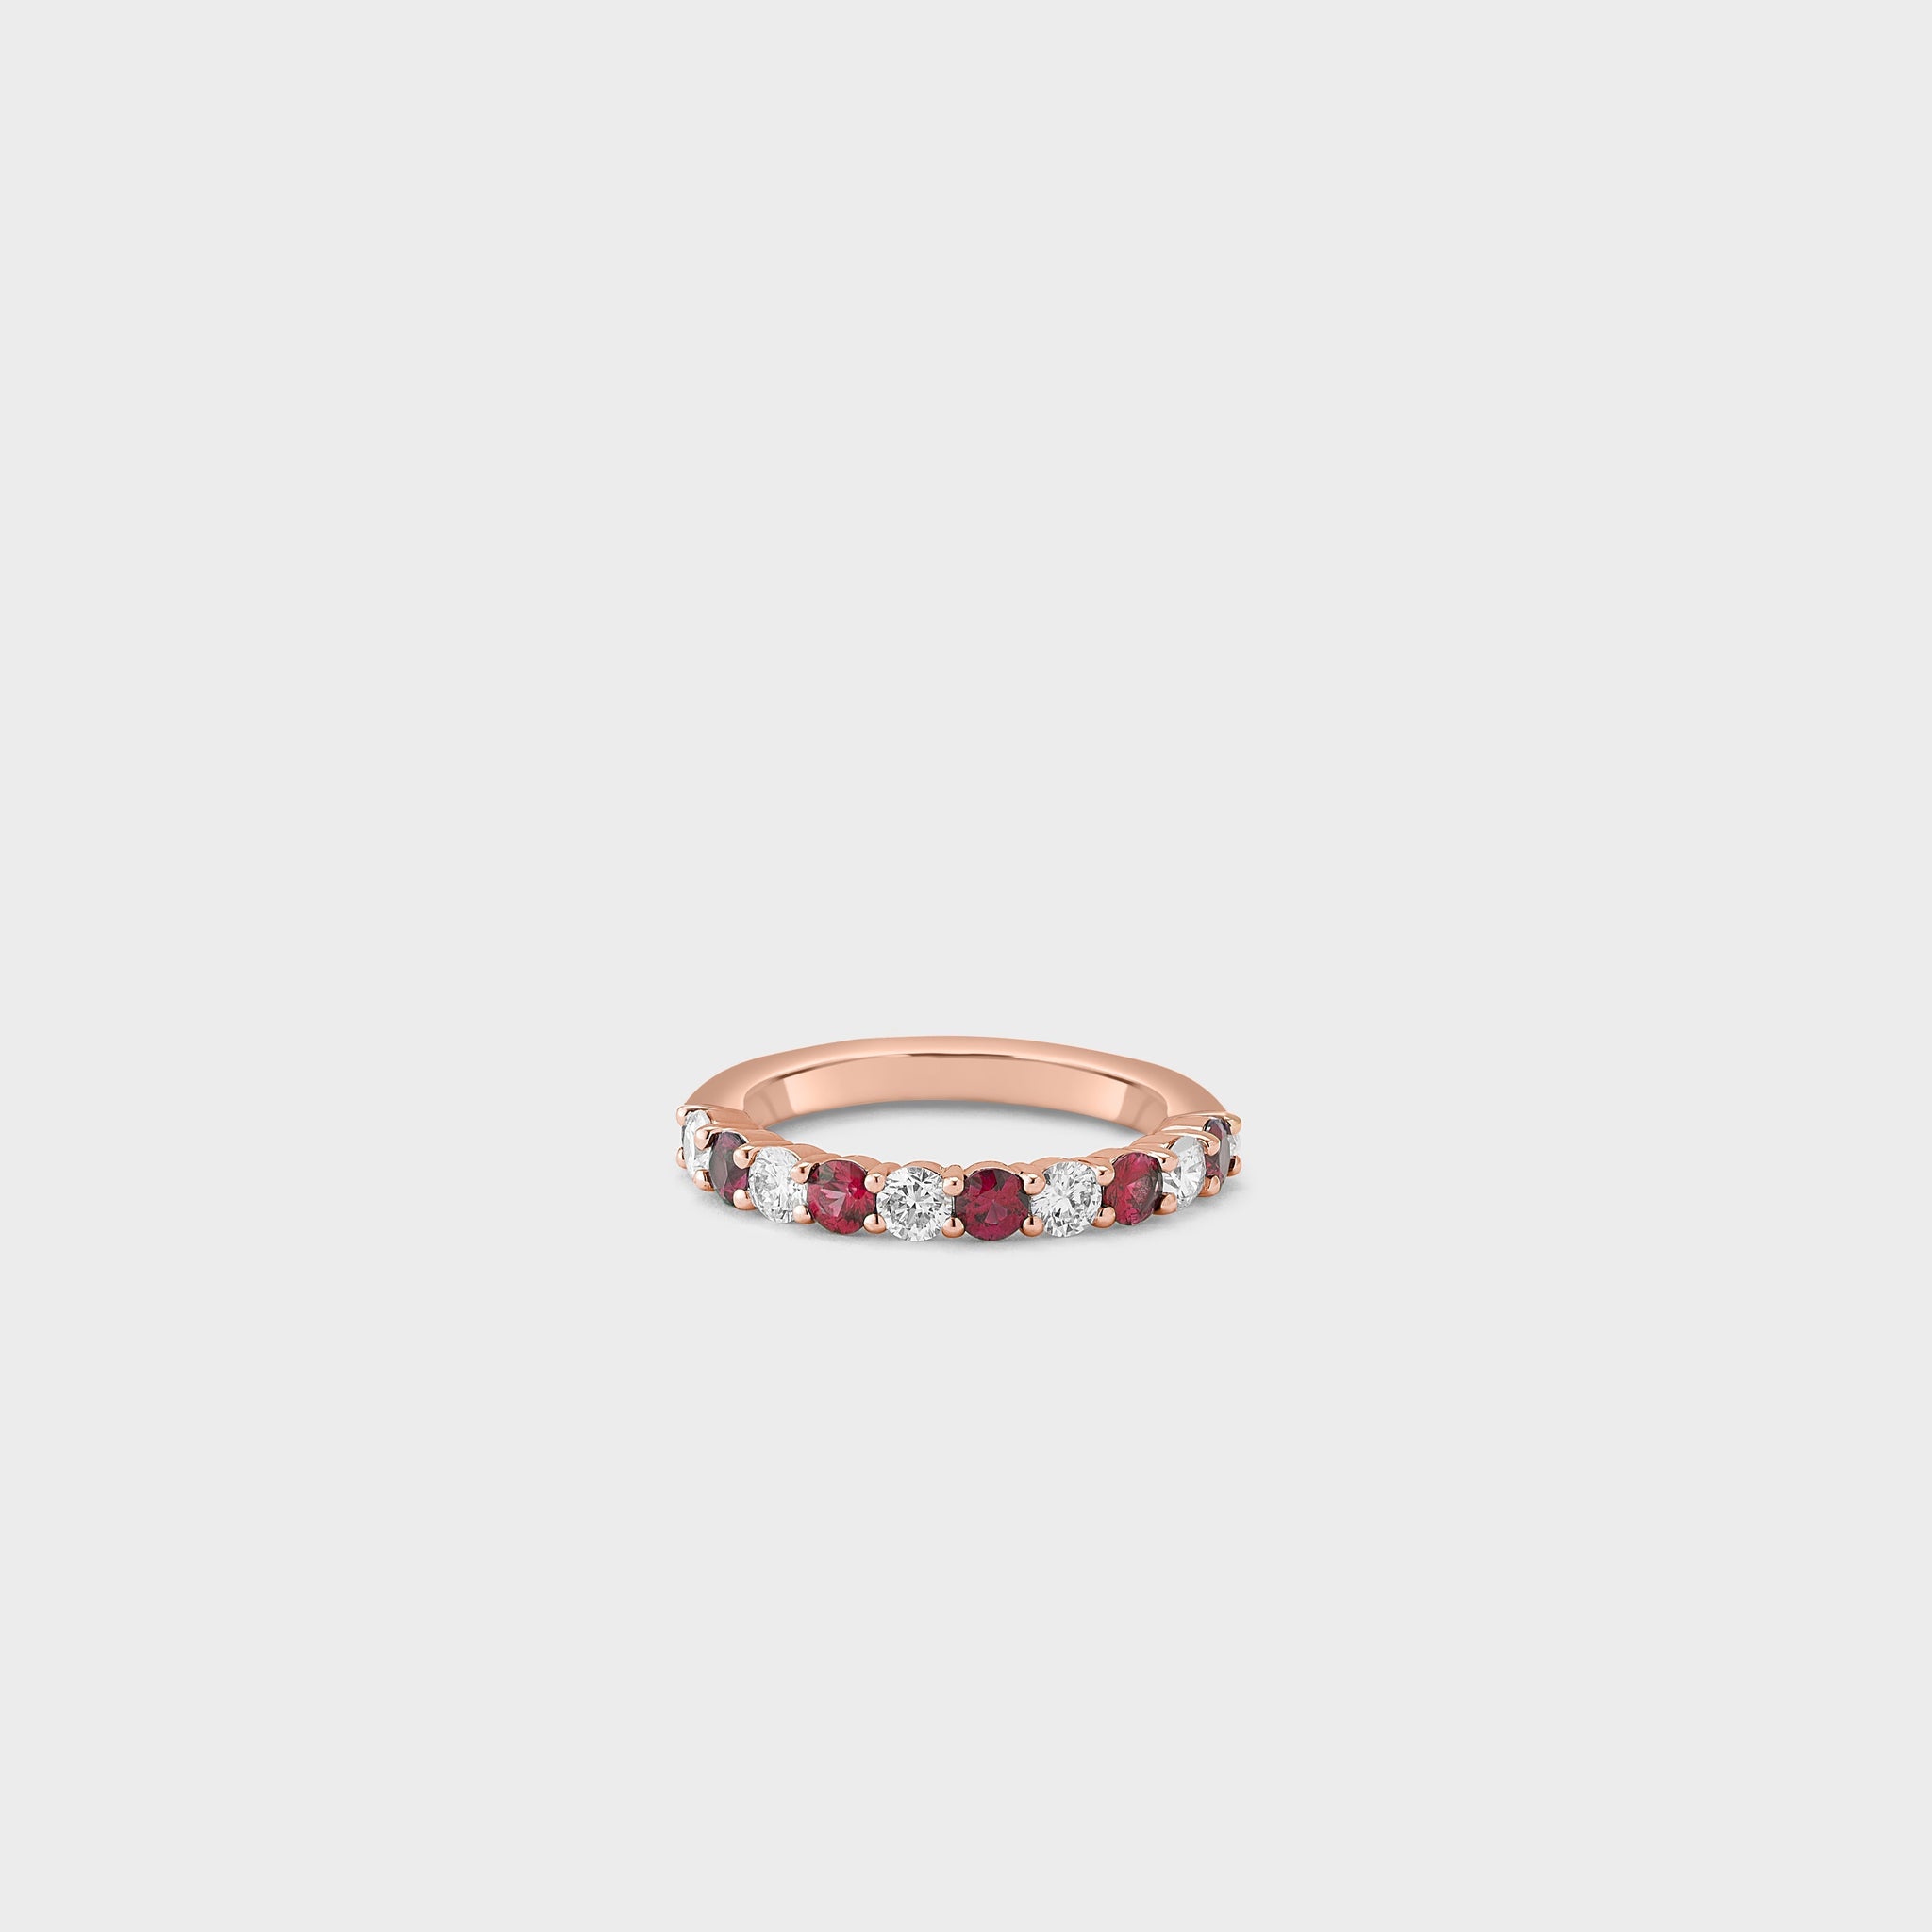 5 Row 2.25 Carat Diamond and Ruby Wedding Band for Men 10K Yellow Gold  Unique Ring 018292